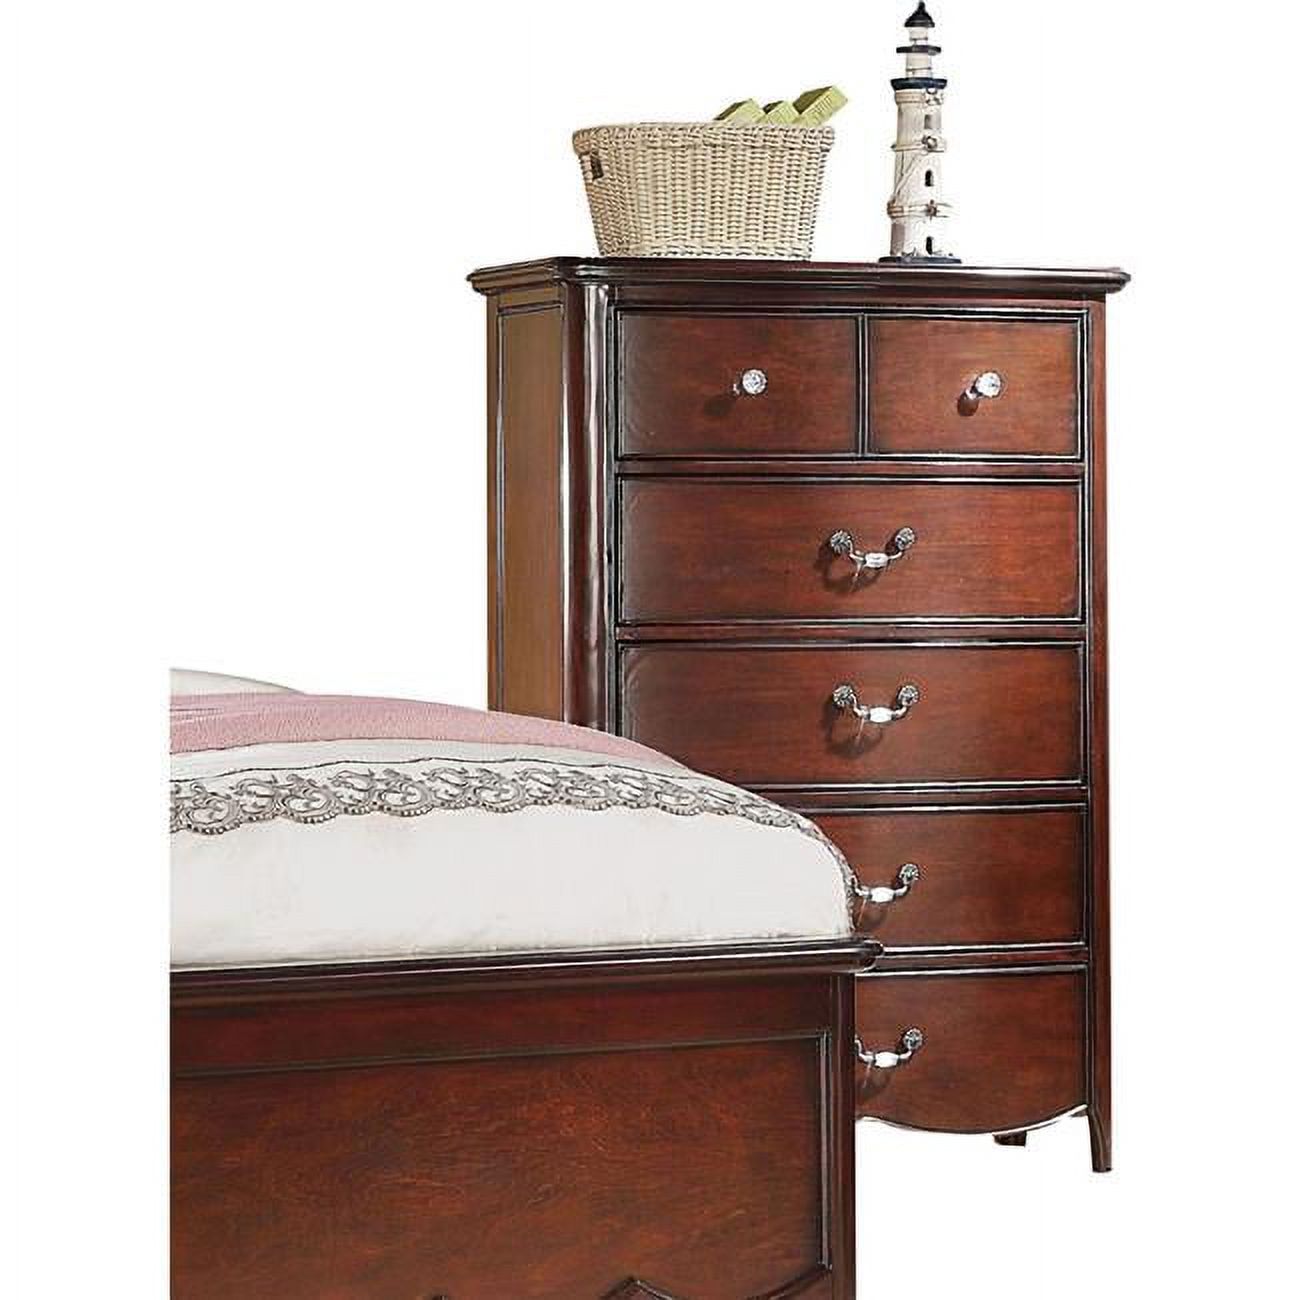 Acme Furniture Cecilie Cherry Chest with Six Drawers - image 1 of 2